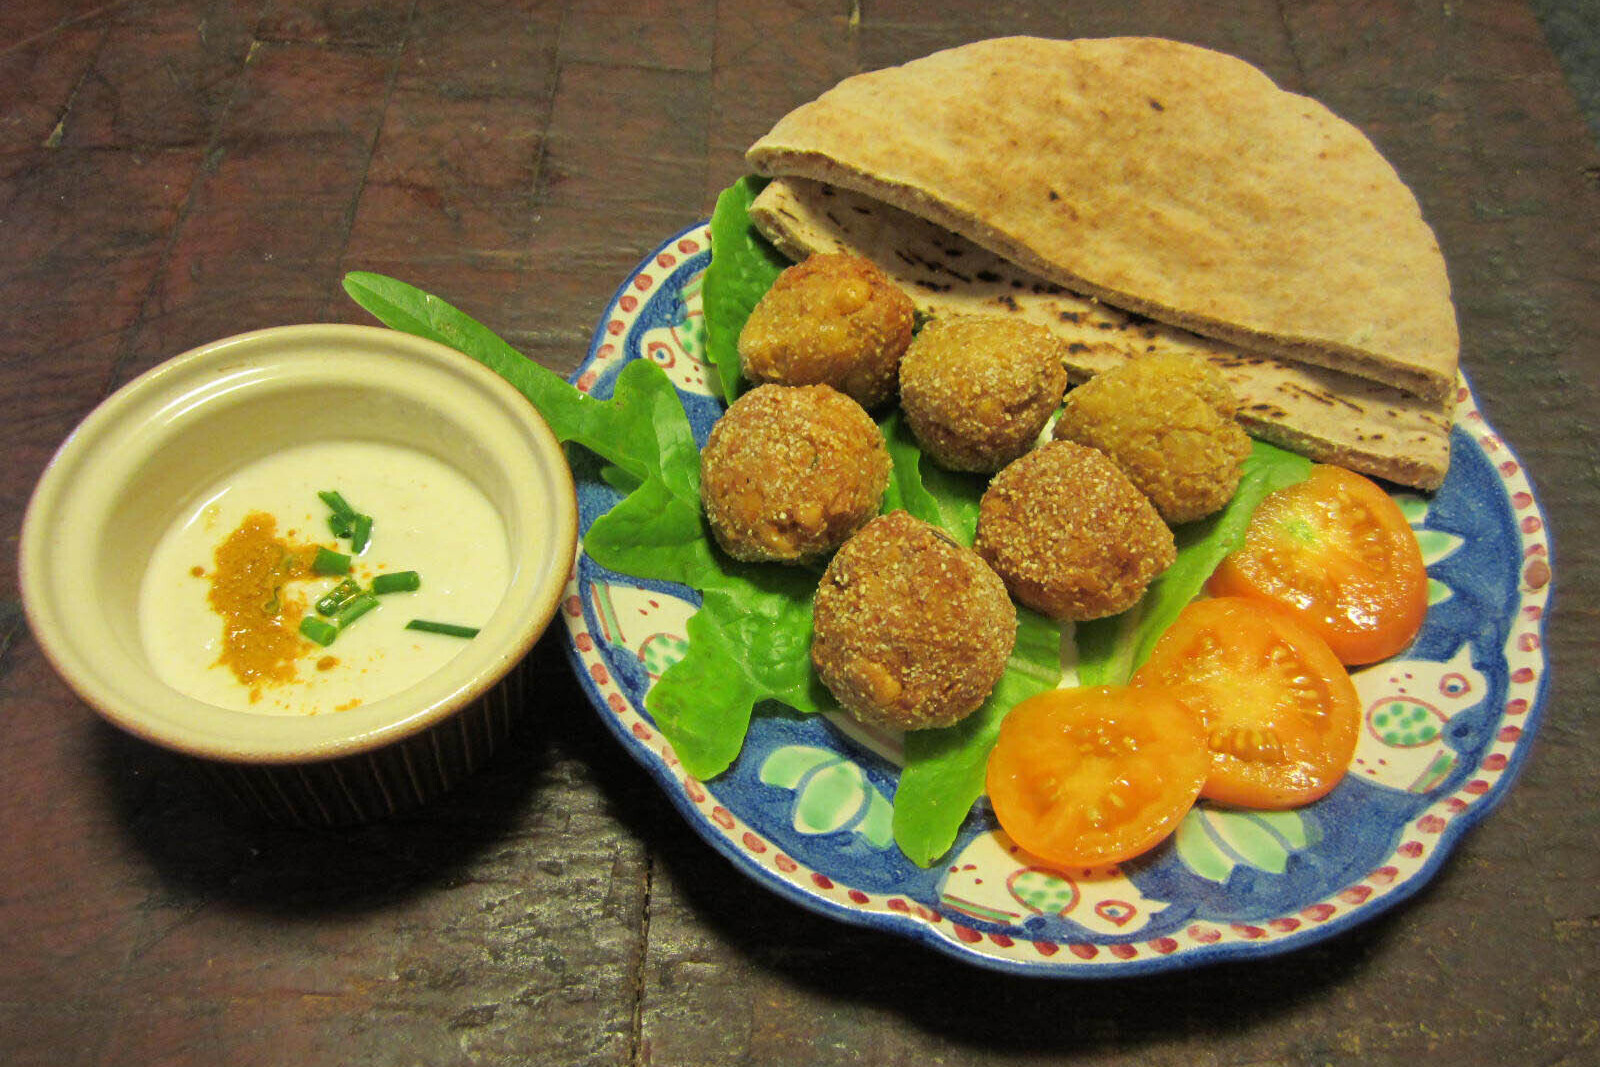 Falafel on a bed of lettuce, with tomatoes pita bread, and a side of tahini/lemon/yogurt sauce